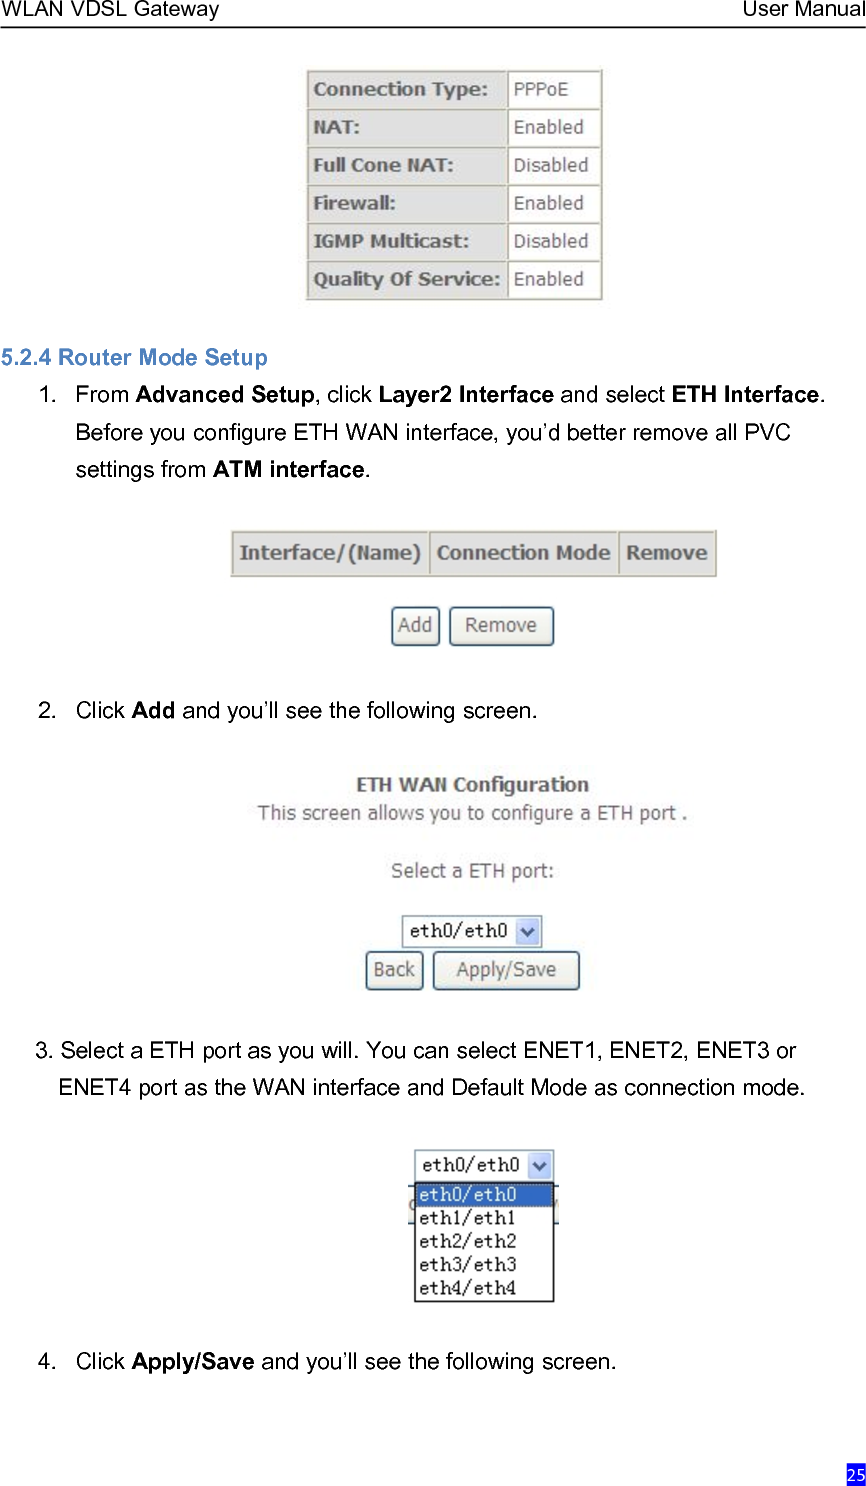 WLAN VDSL Gateway User Manual255.2.4 Router Mode Setup1. From Advanced Setup, click Layer2 Interface and select ETH Interface.Before you configure ETH WAN interface, you’d better remove all PVCsettings from ATM interface.2. Click Add and you’ll see the following screen.3. Select a ETH port as you will. You can select ENET1, ENET2, ENET3 orENET4 port as the WAN interface and Default Mode as connection mode.4. Click Apply/Save and you’ll see the following screen.